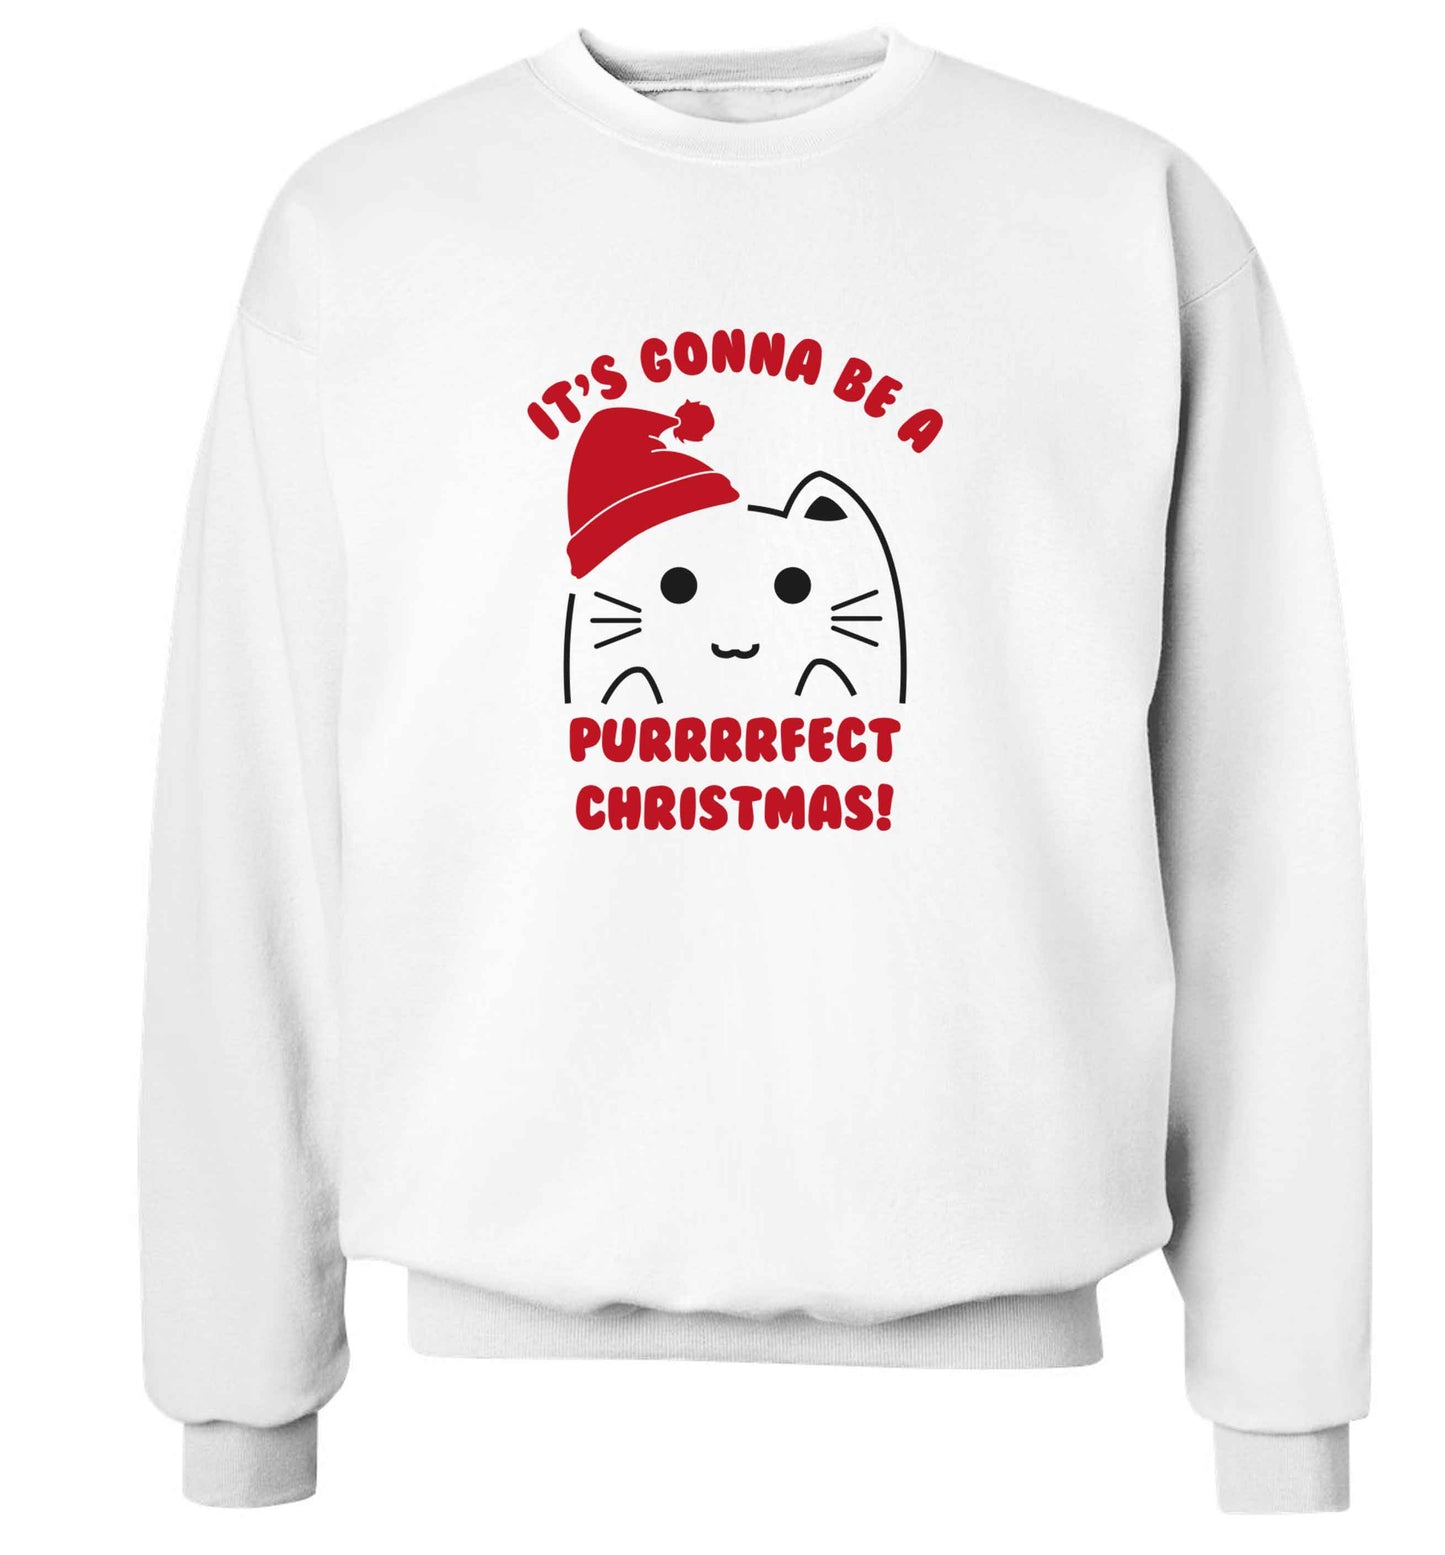 It's going to be a purrfect Christmas adult's unisex white sweater 2XL